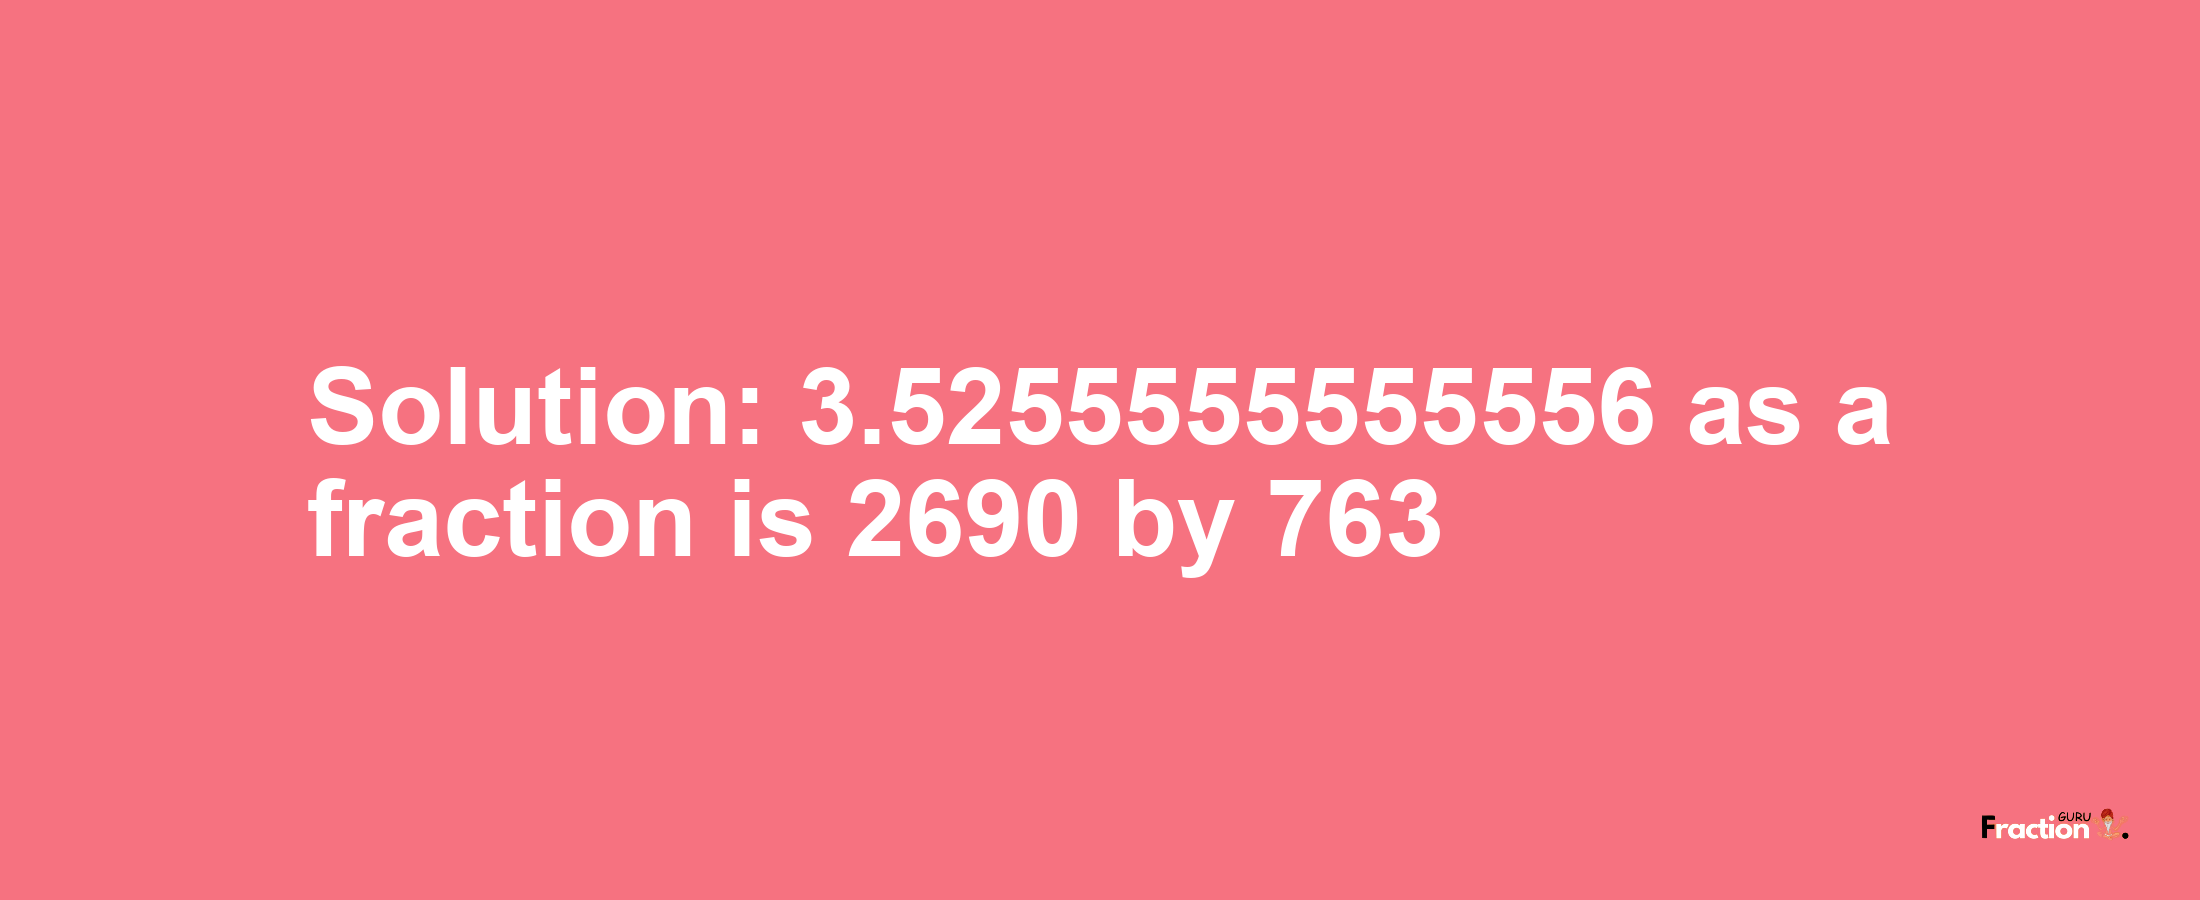 Solution:3.5255555555556 as a fraction is 2690/763